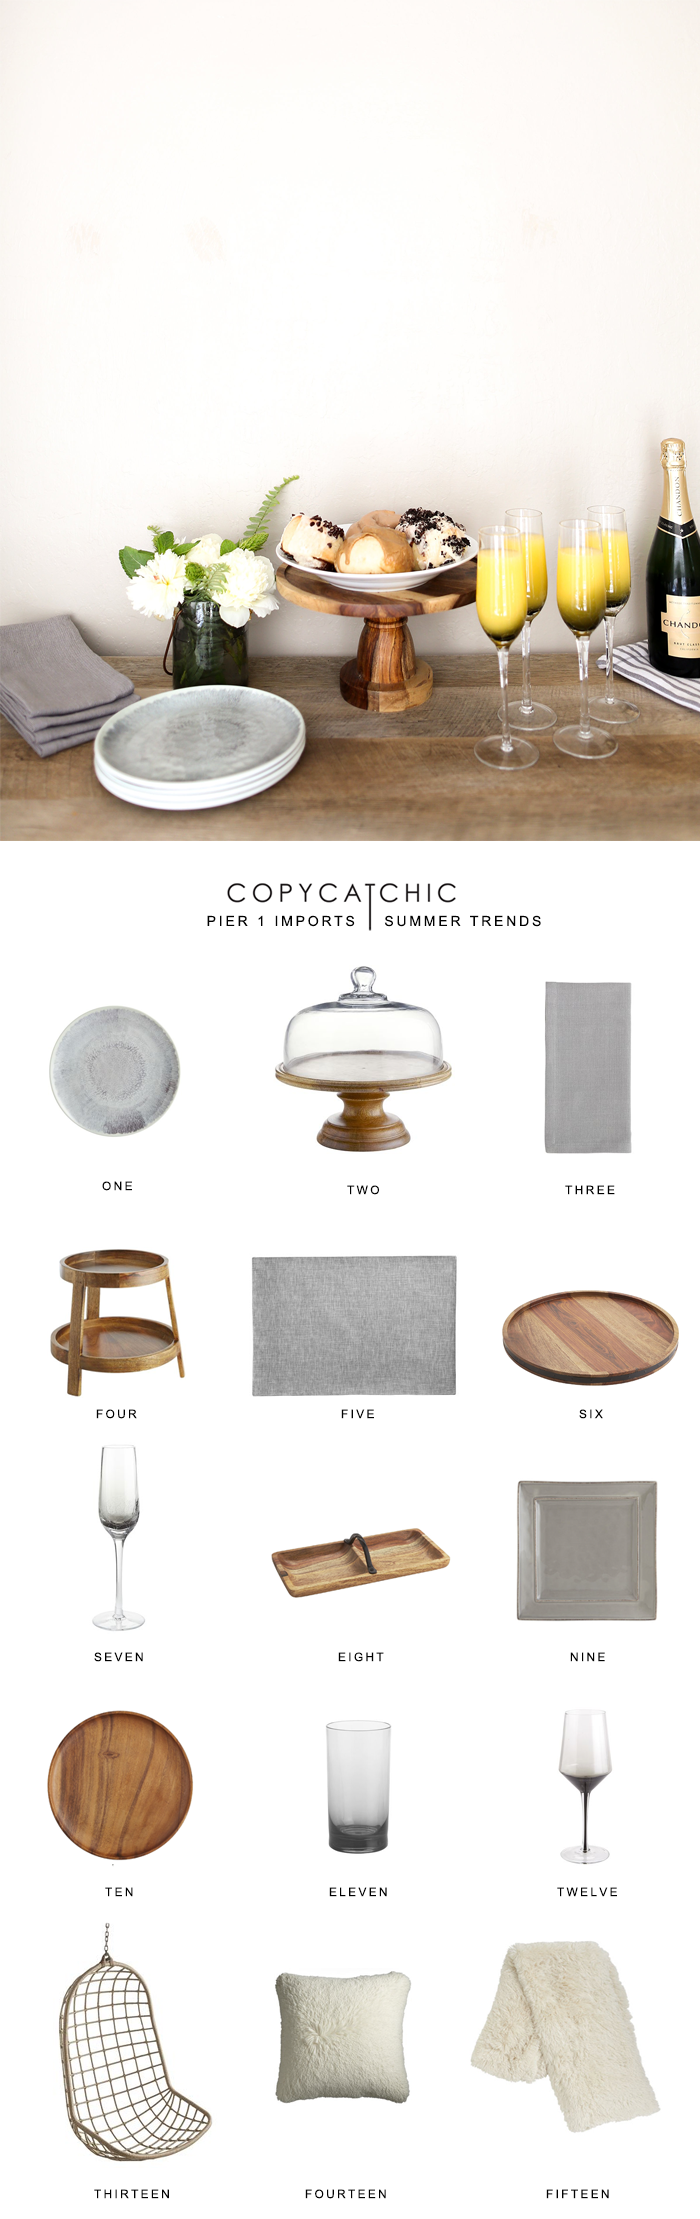 Copy Cat Chic's favorite home decor trends for summer from Pier 1 Imports? Grays, rich wood and warm, creamy neutrals. Light tones with lots of texture.